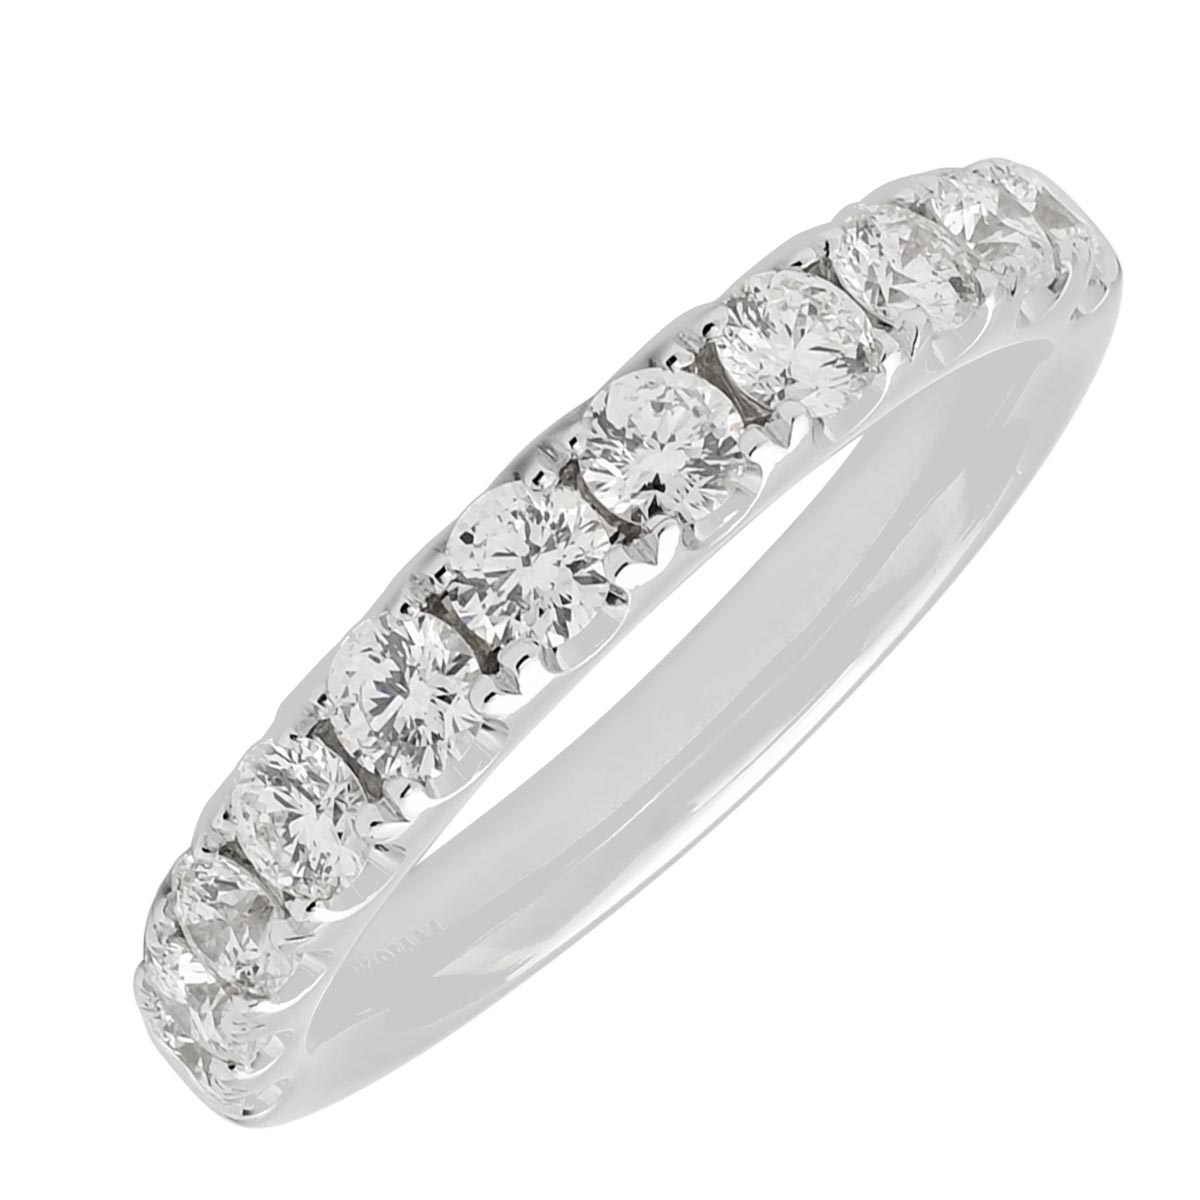 Northern Star Diamond Band in 14kt White Gold (1ct tw)